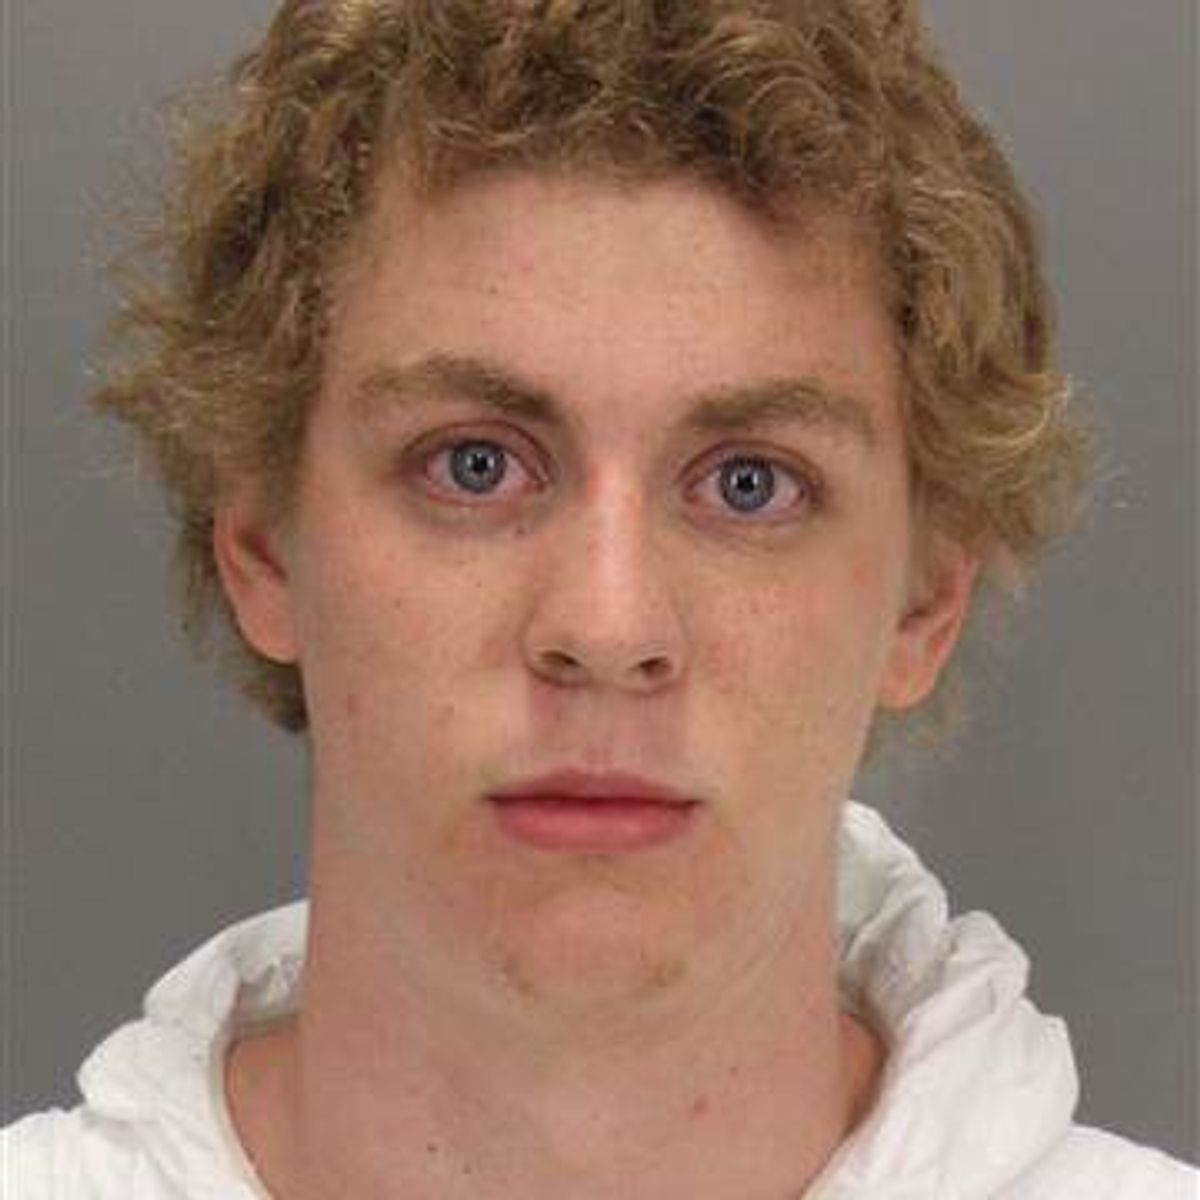 Stanford Rape Case: The Letter That Changed Everything